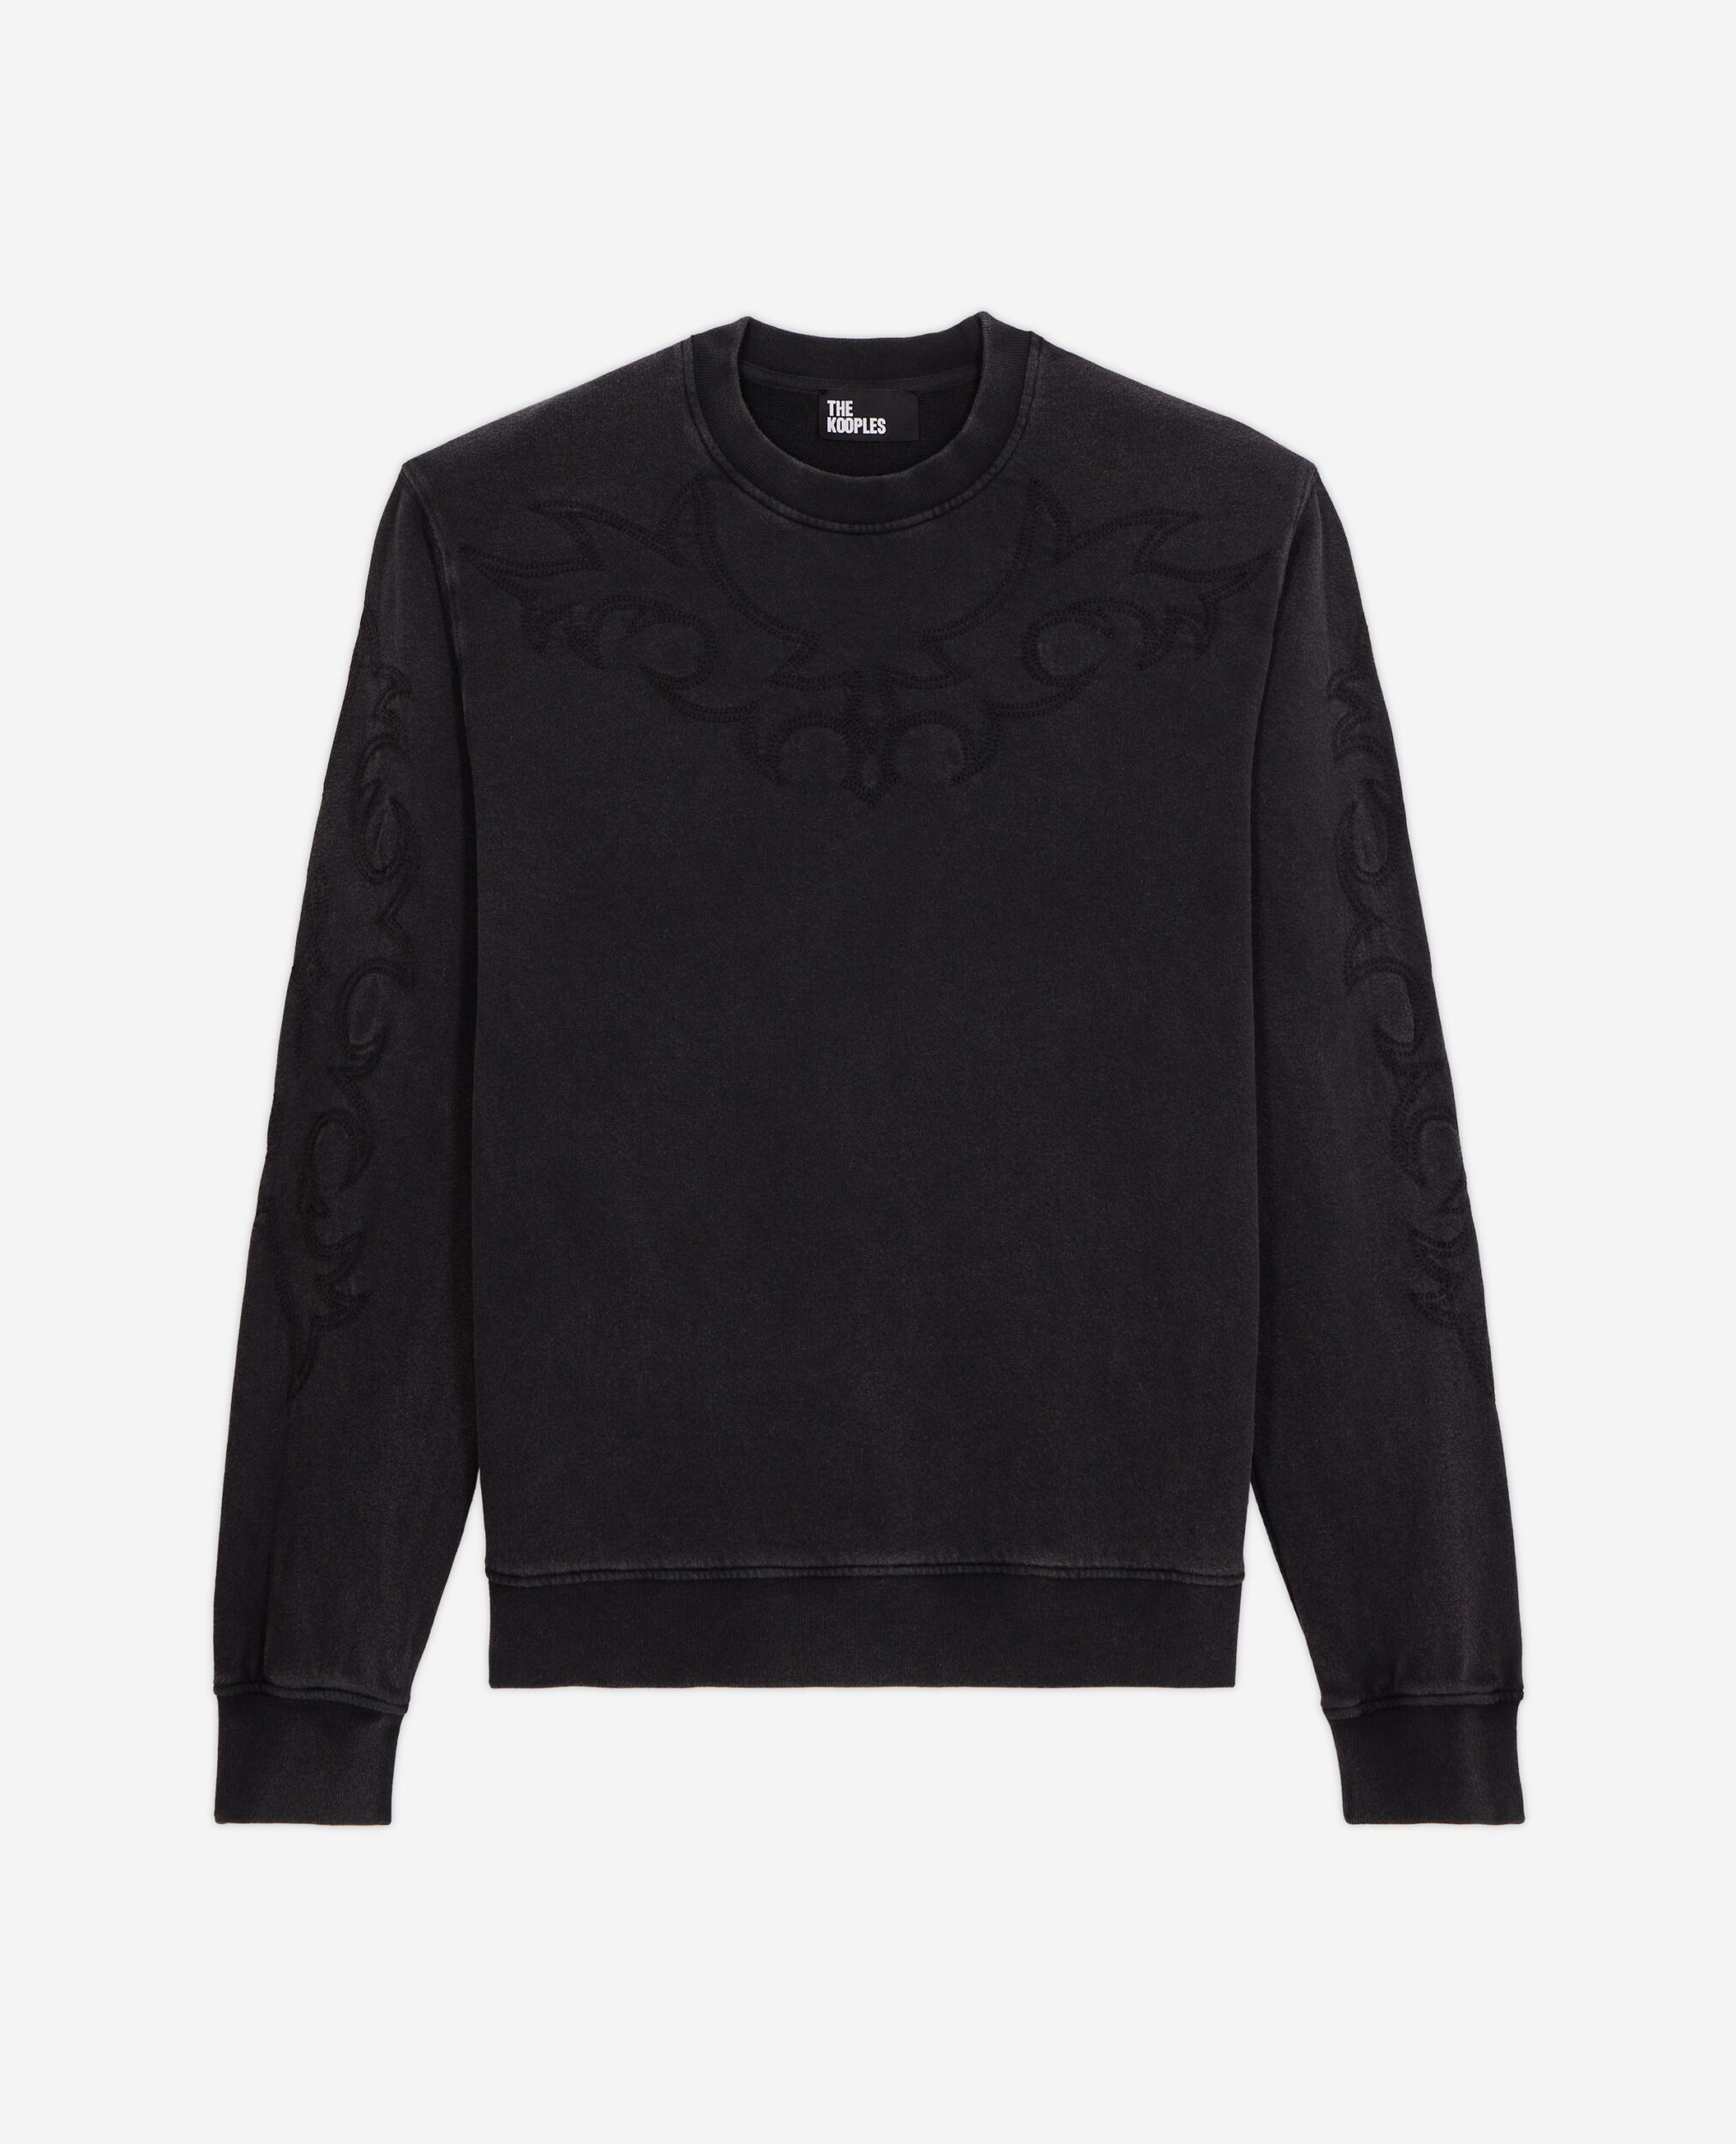 Black sweatshirt with Western-style embroidery, BLACK WASHED, hi-res image number null